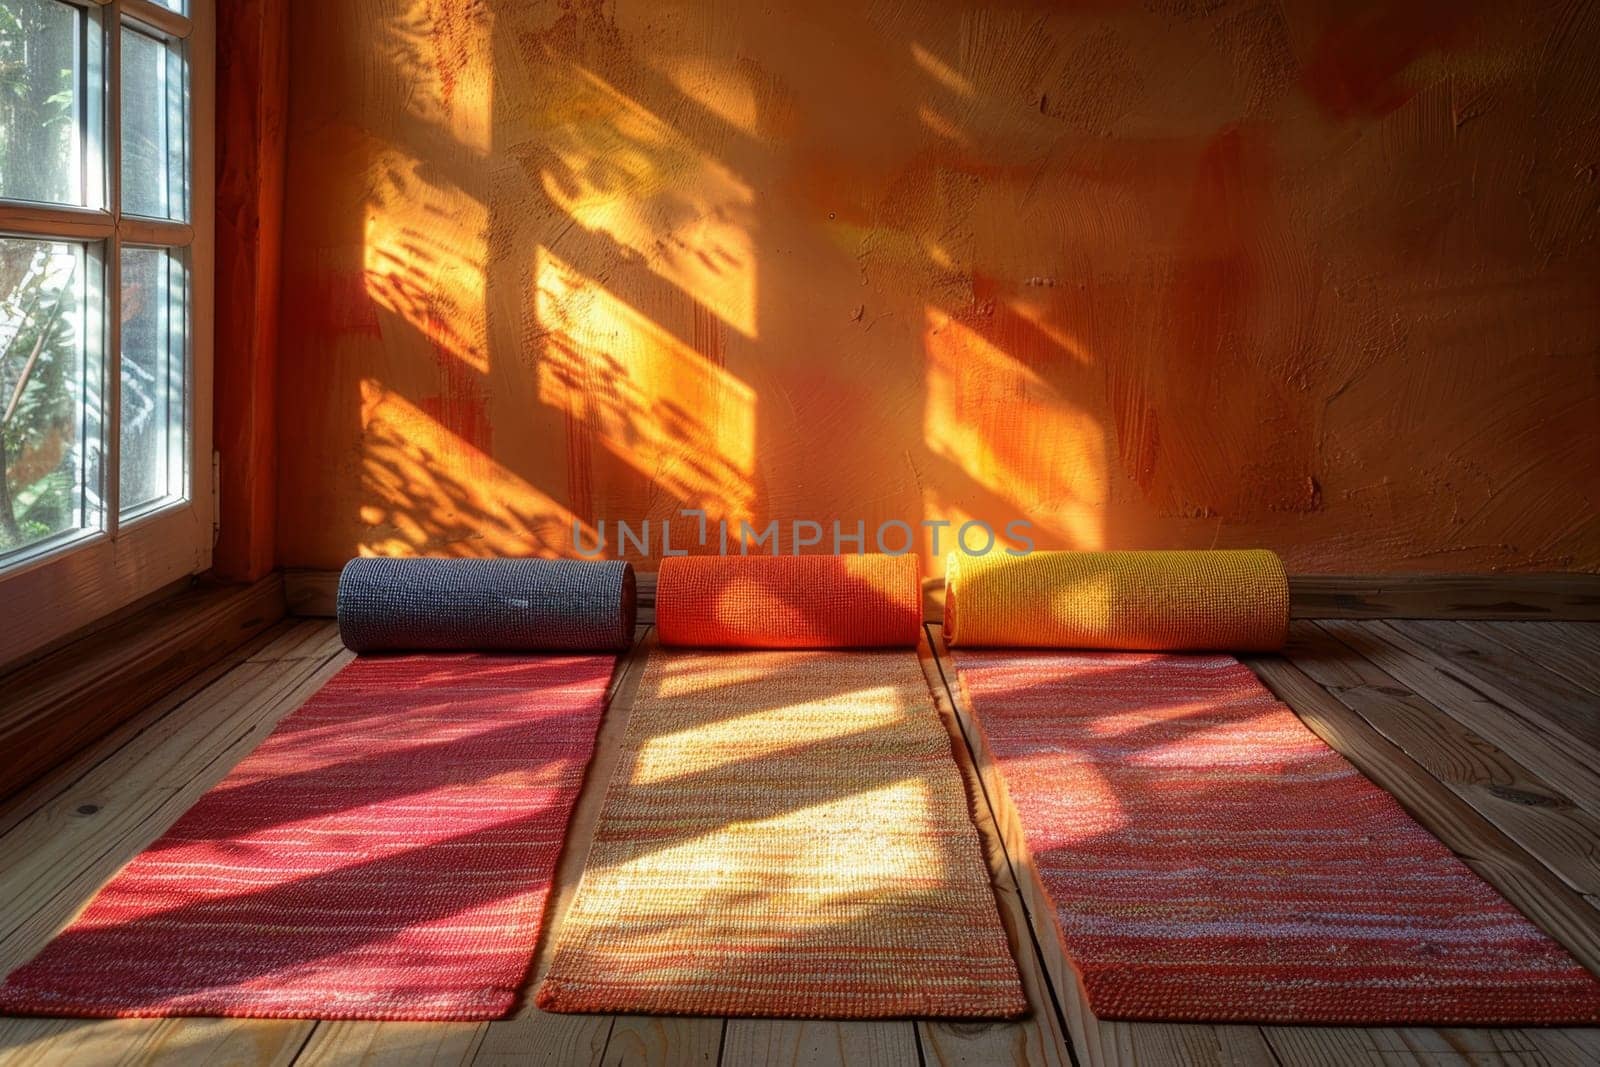 Yoga mats are spread out on the wooden floor in the room. International Yoga Day by Lobachad